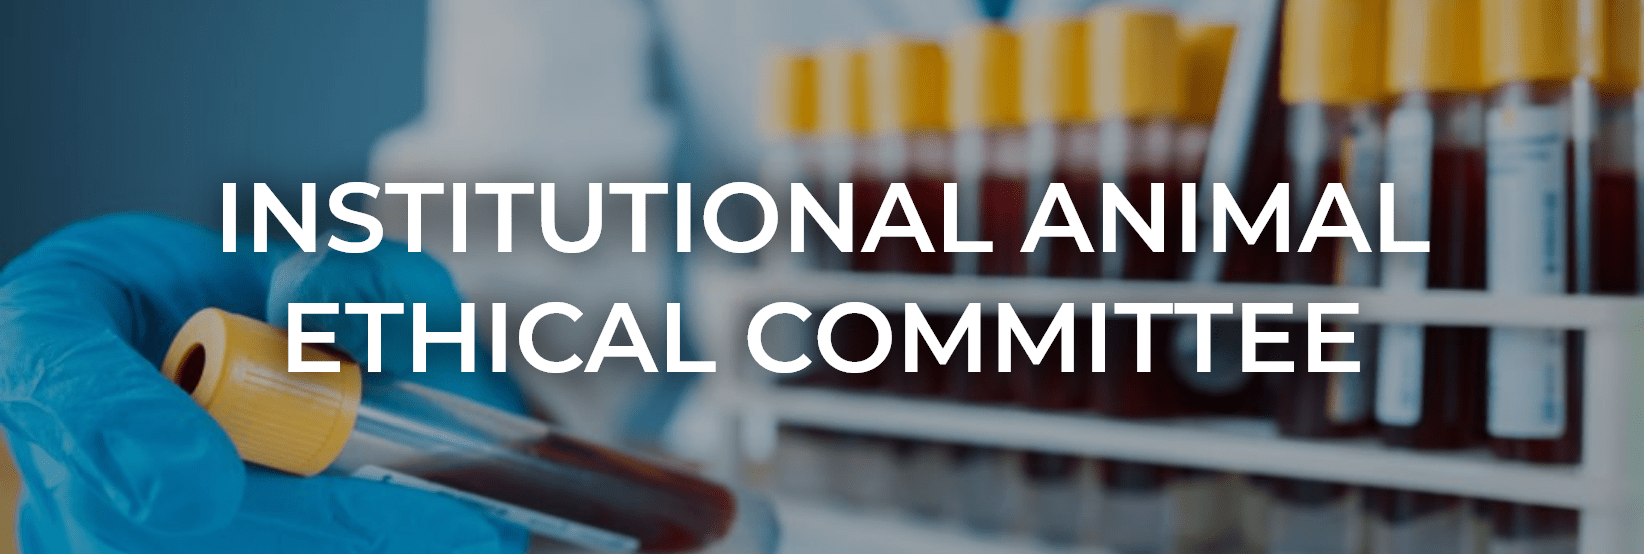 Institutional animal ethical committee